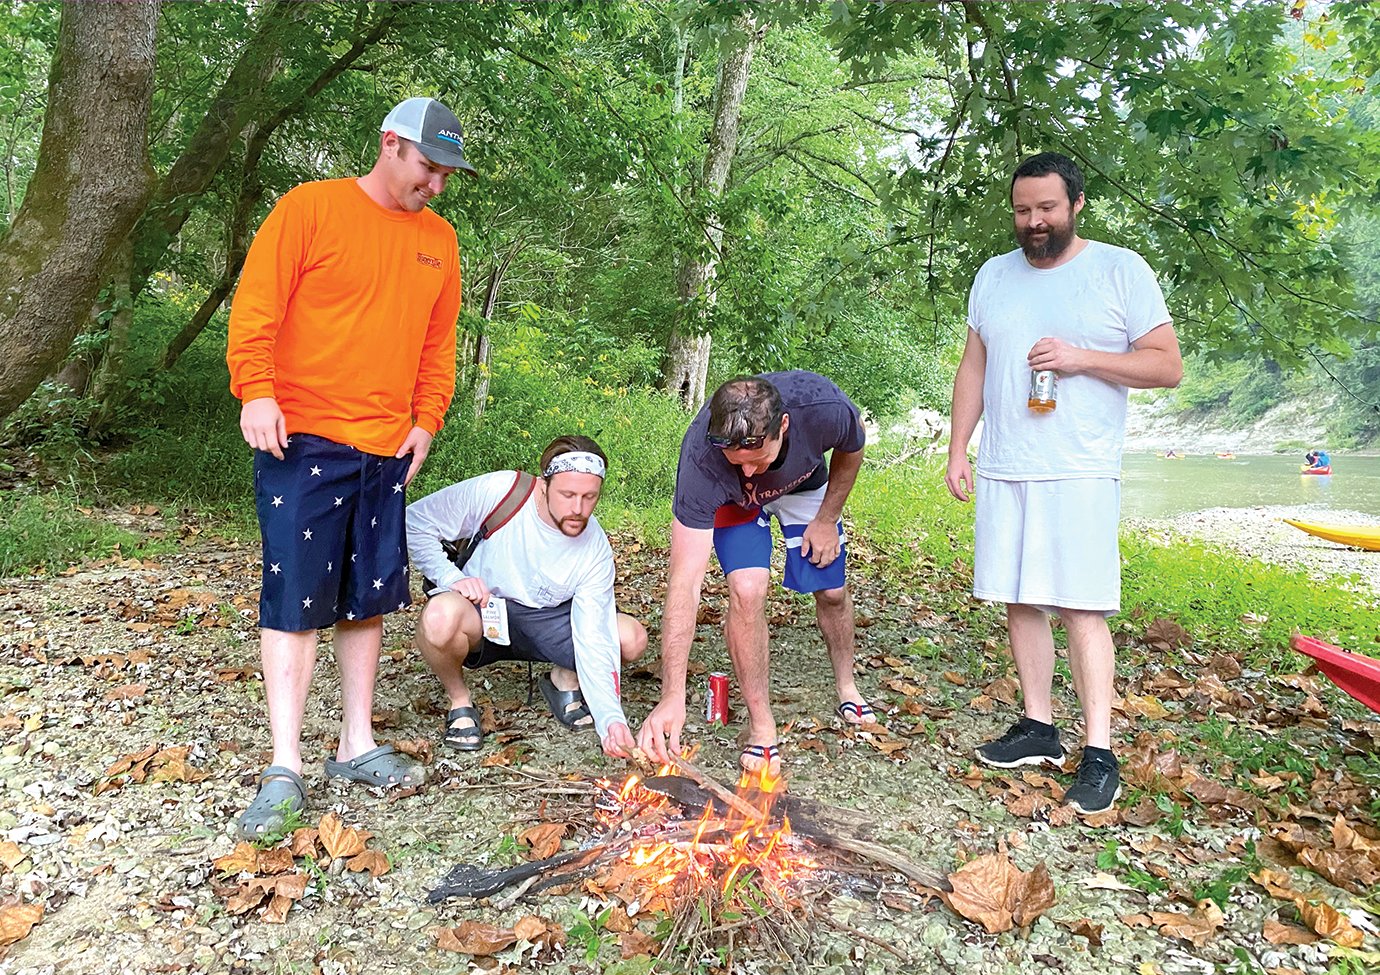 A group of kayakers builds a fire on the banks of Sugar Creek this Labor Day Weekend, making the best of the morning rain. Several caught in inclement weather on the creek Sunday were warmed by the comaraderie and impromptu fire created by Tom McClamroch, from left, Levi Hession, Mitch Barker and Jeremiah Brown.